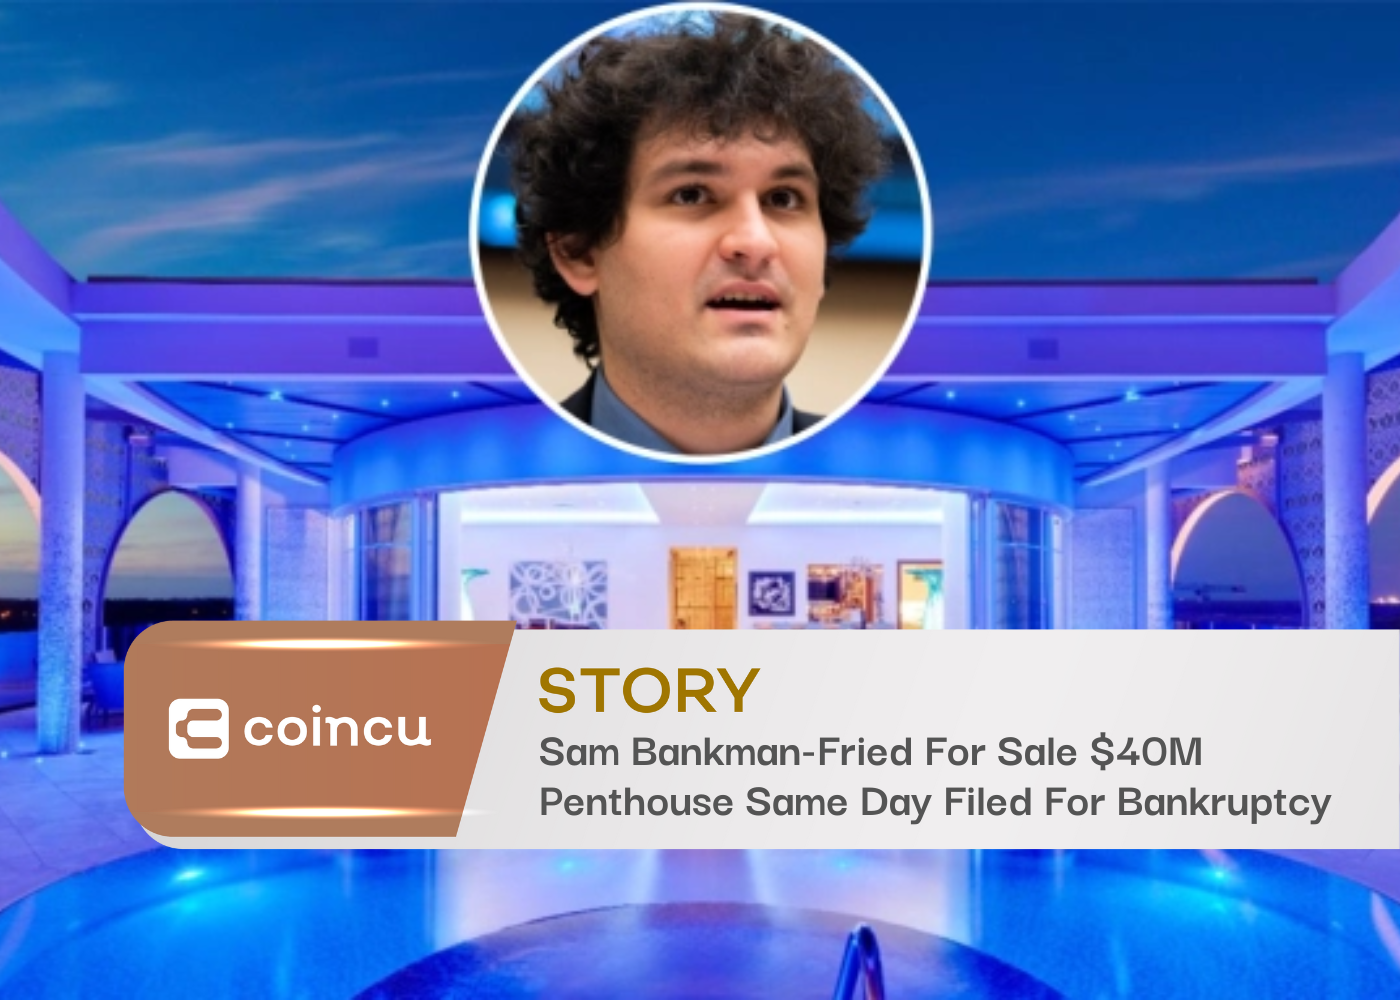 Sam Bankman-Fried For Sale $40M Penthouse Same Day Filed For Bankruptcy